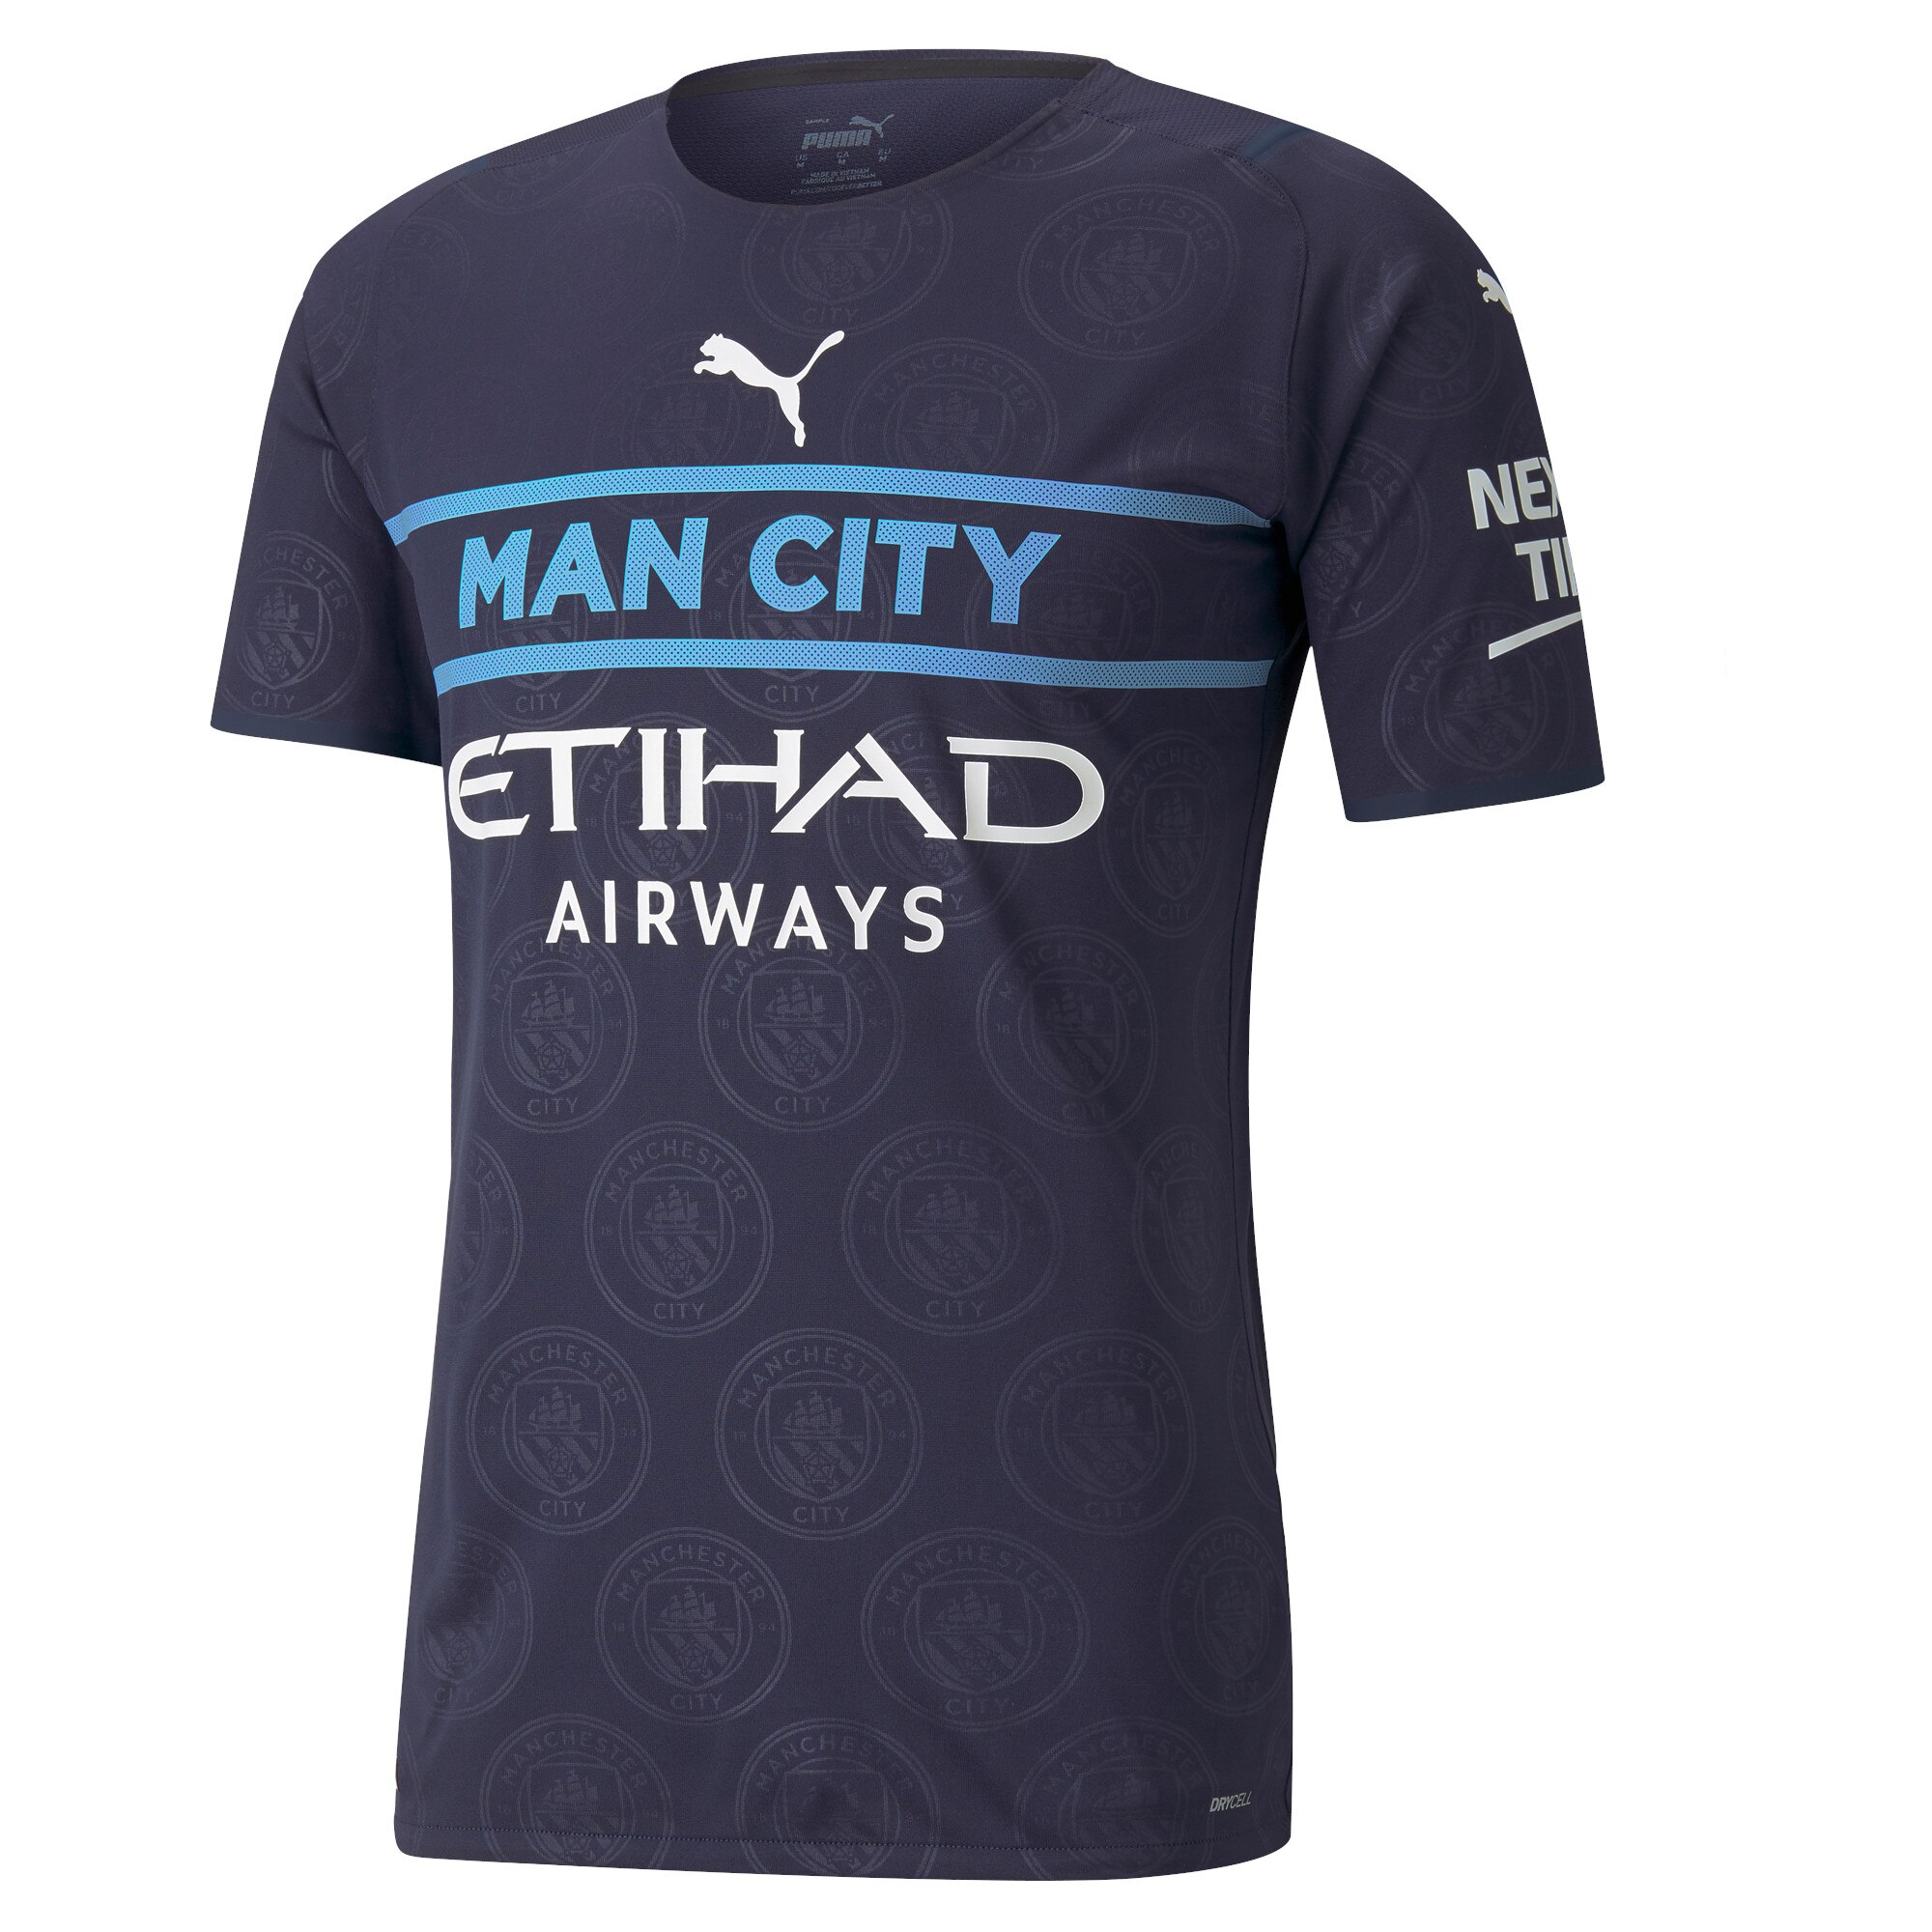 Manchester City Authentic Third Shirt 2021-22 with G.Jesus 9 printing